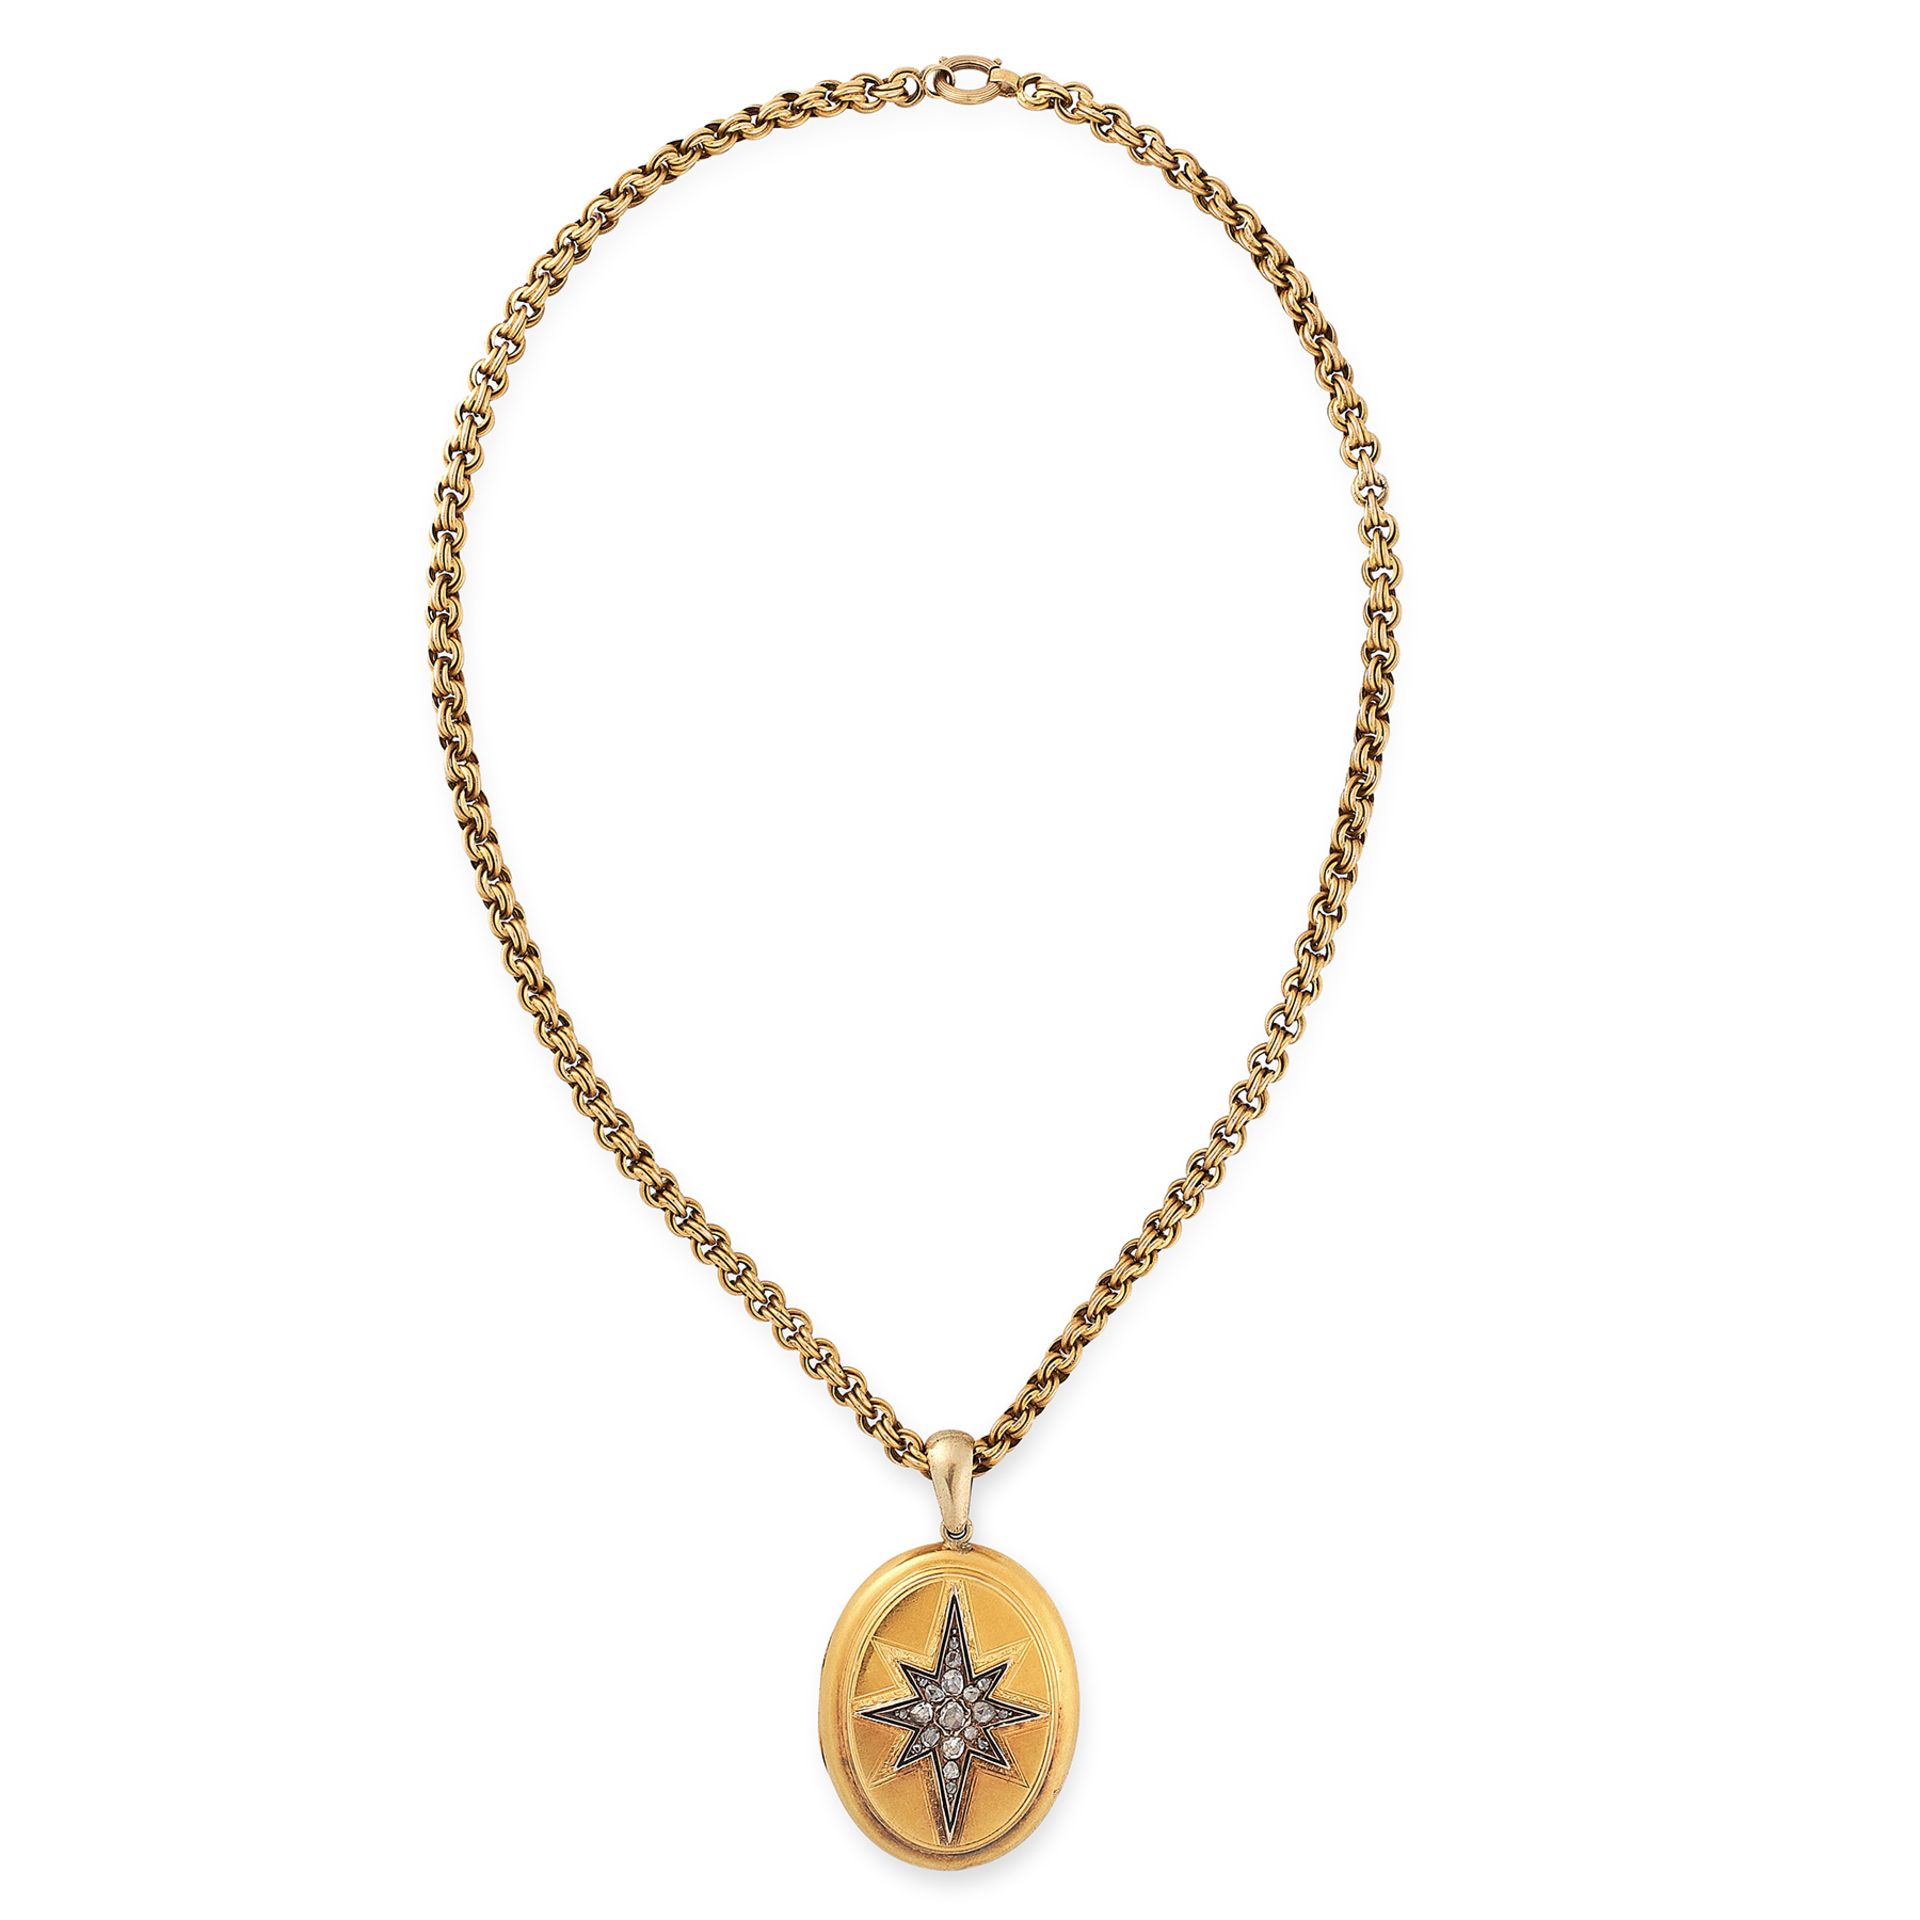 AN ANTIQUE DIAMOND AND ENAMEL LOCKET PENDANT AND CHAIN in 15ct yellow gold, the oval body set with